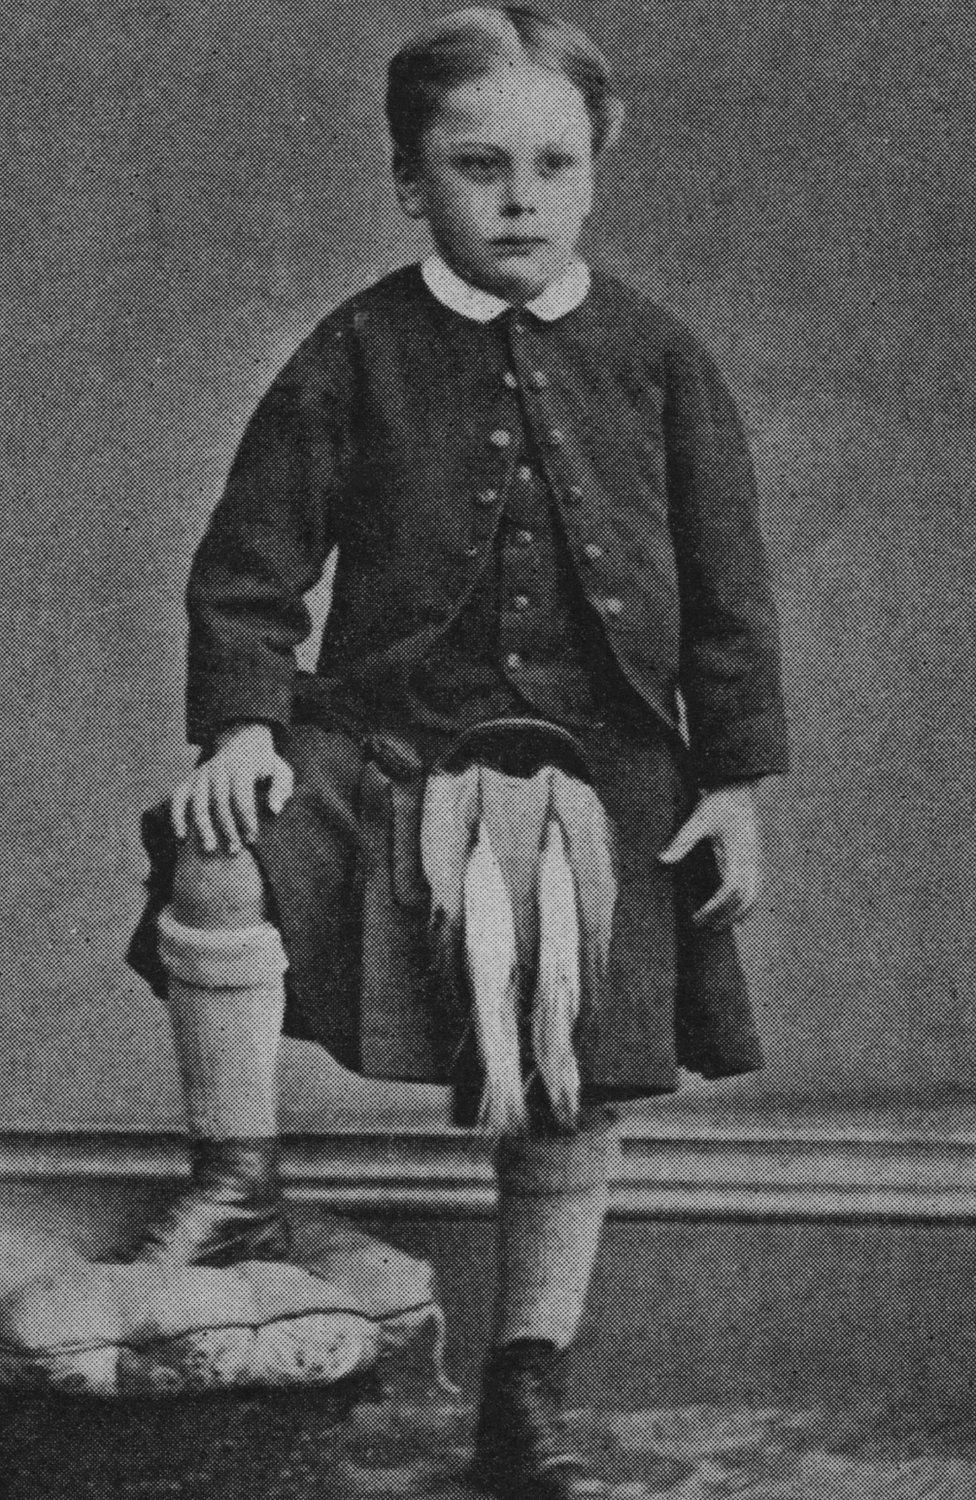 A childhood portrait of Douglas Haig in Edinburgh from about 1870